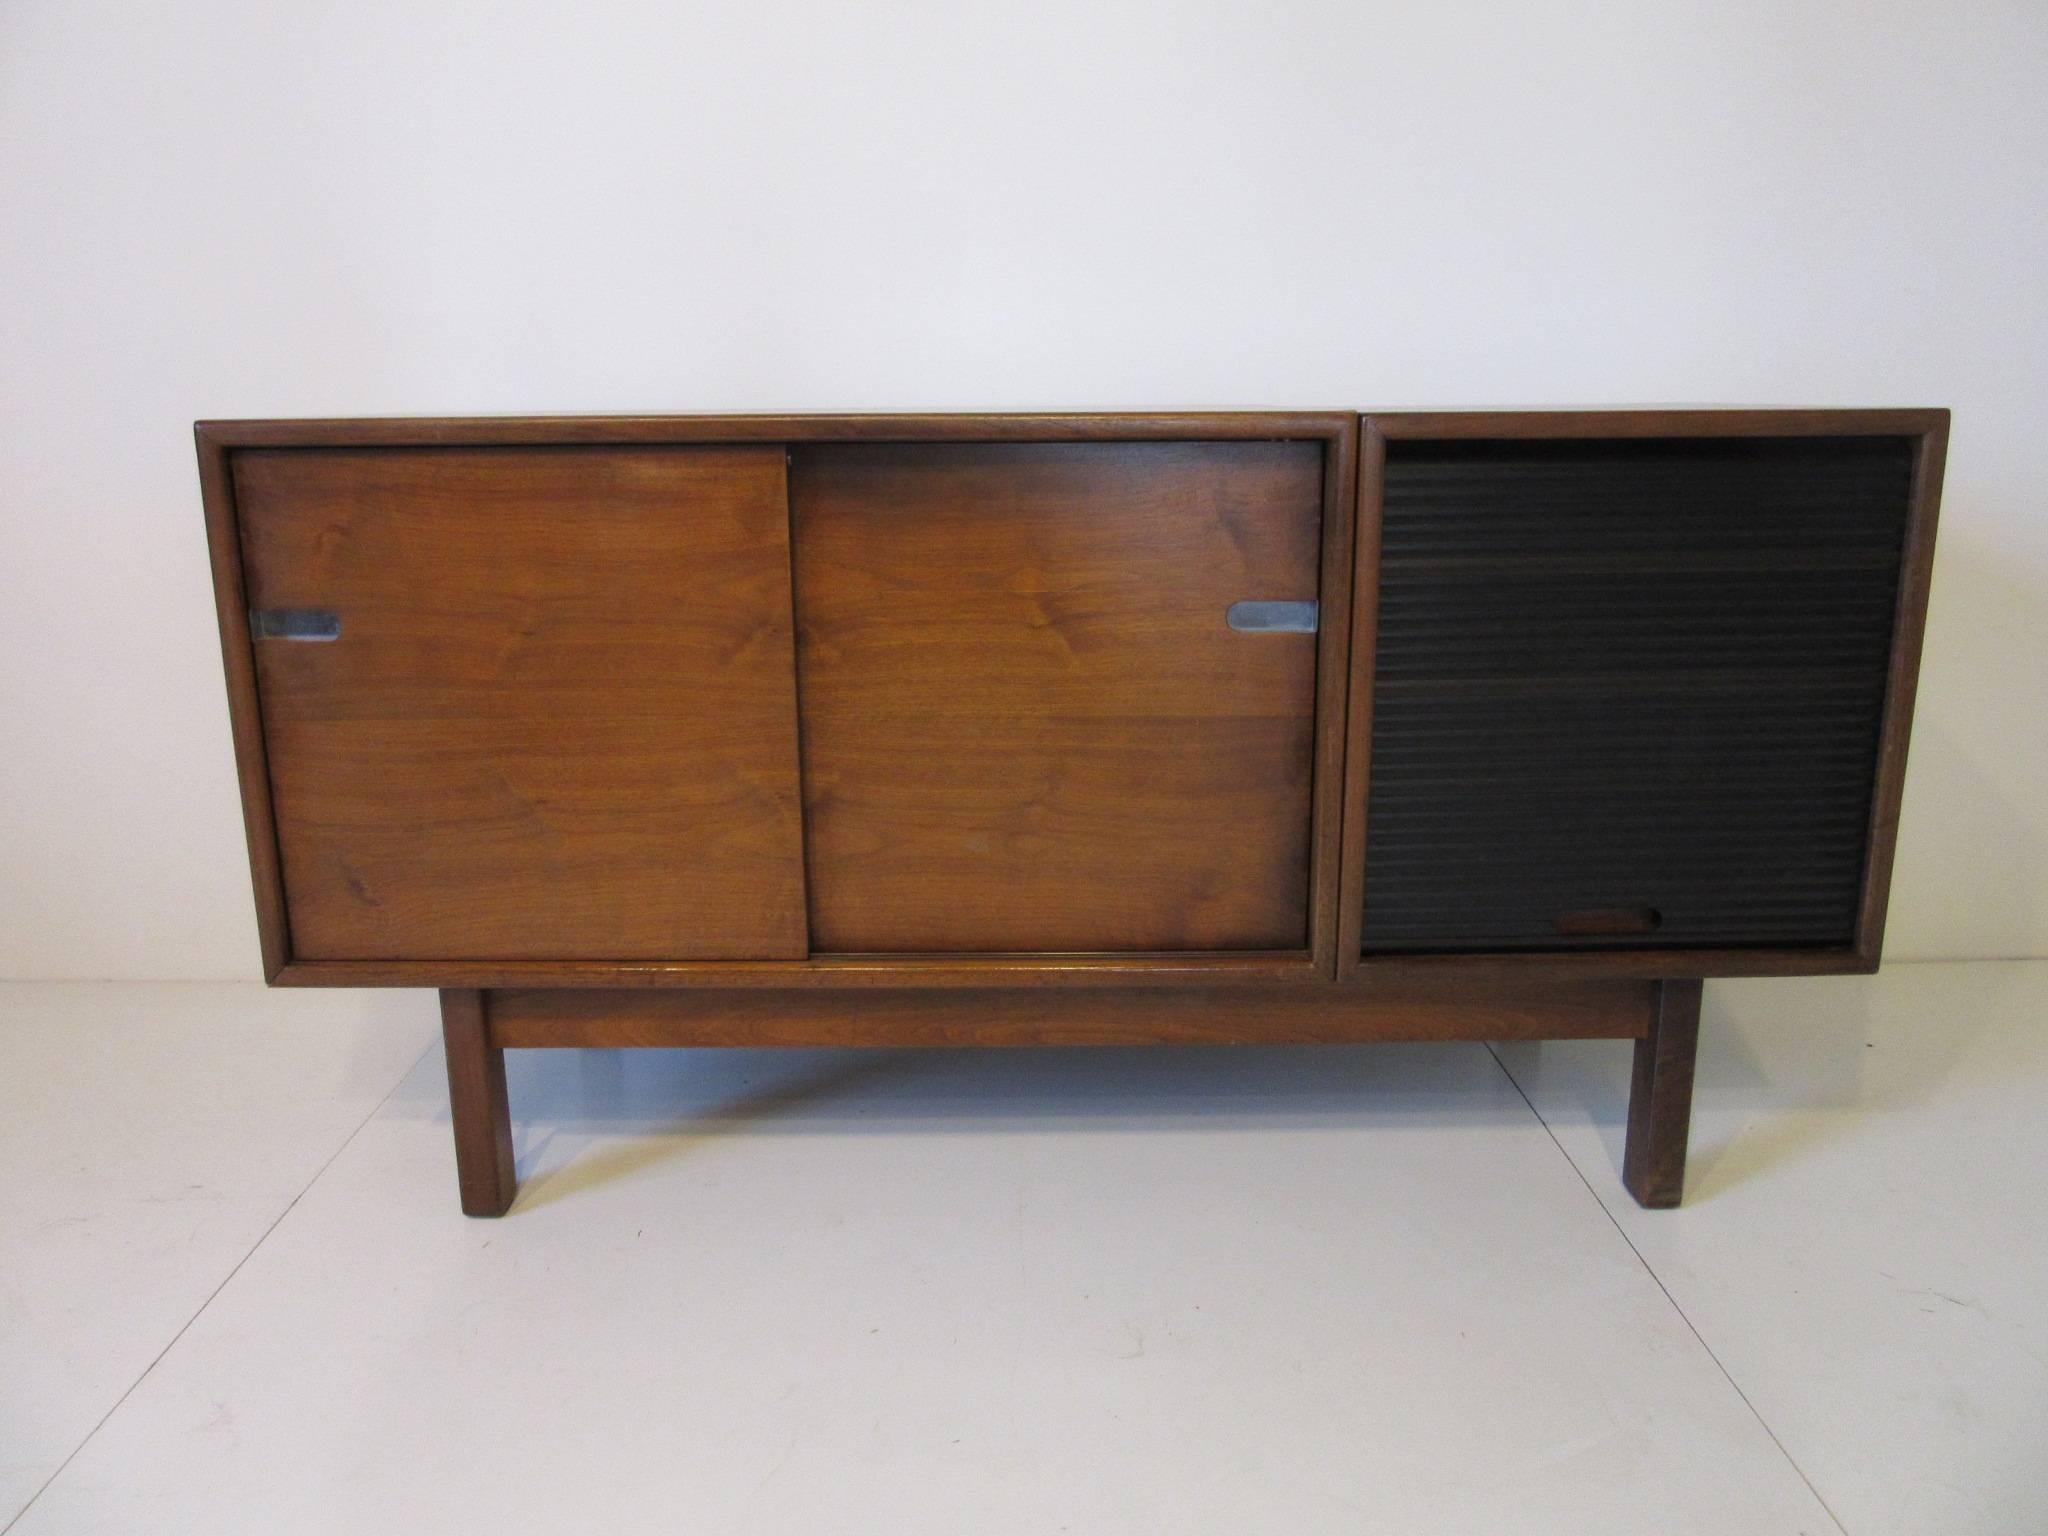 A very well crafted dark grained walnut credenza with double sliding doors and a dark anodized metal pull up tambour door with three drawers. Inside the sliding doors Revel two adjustable shelves and detailed cutout door pulls inset with polished